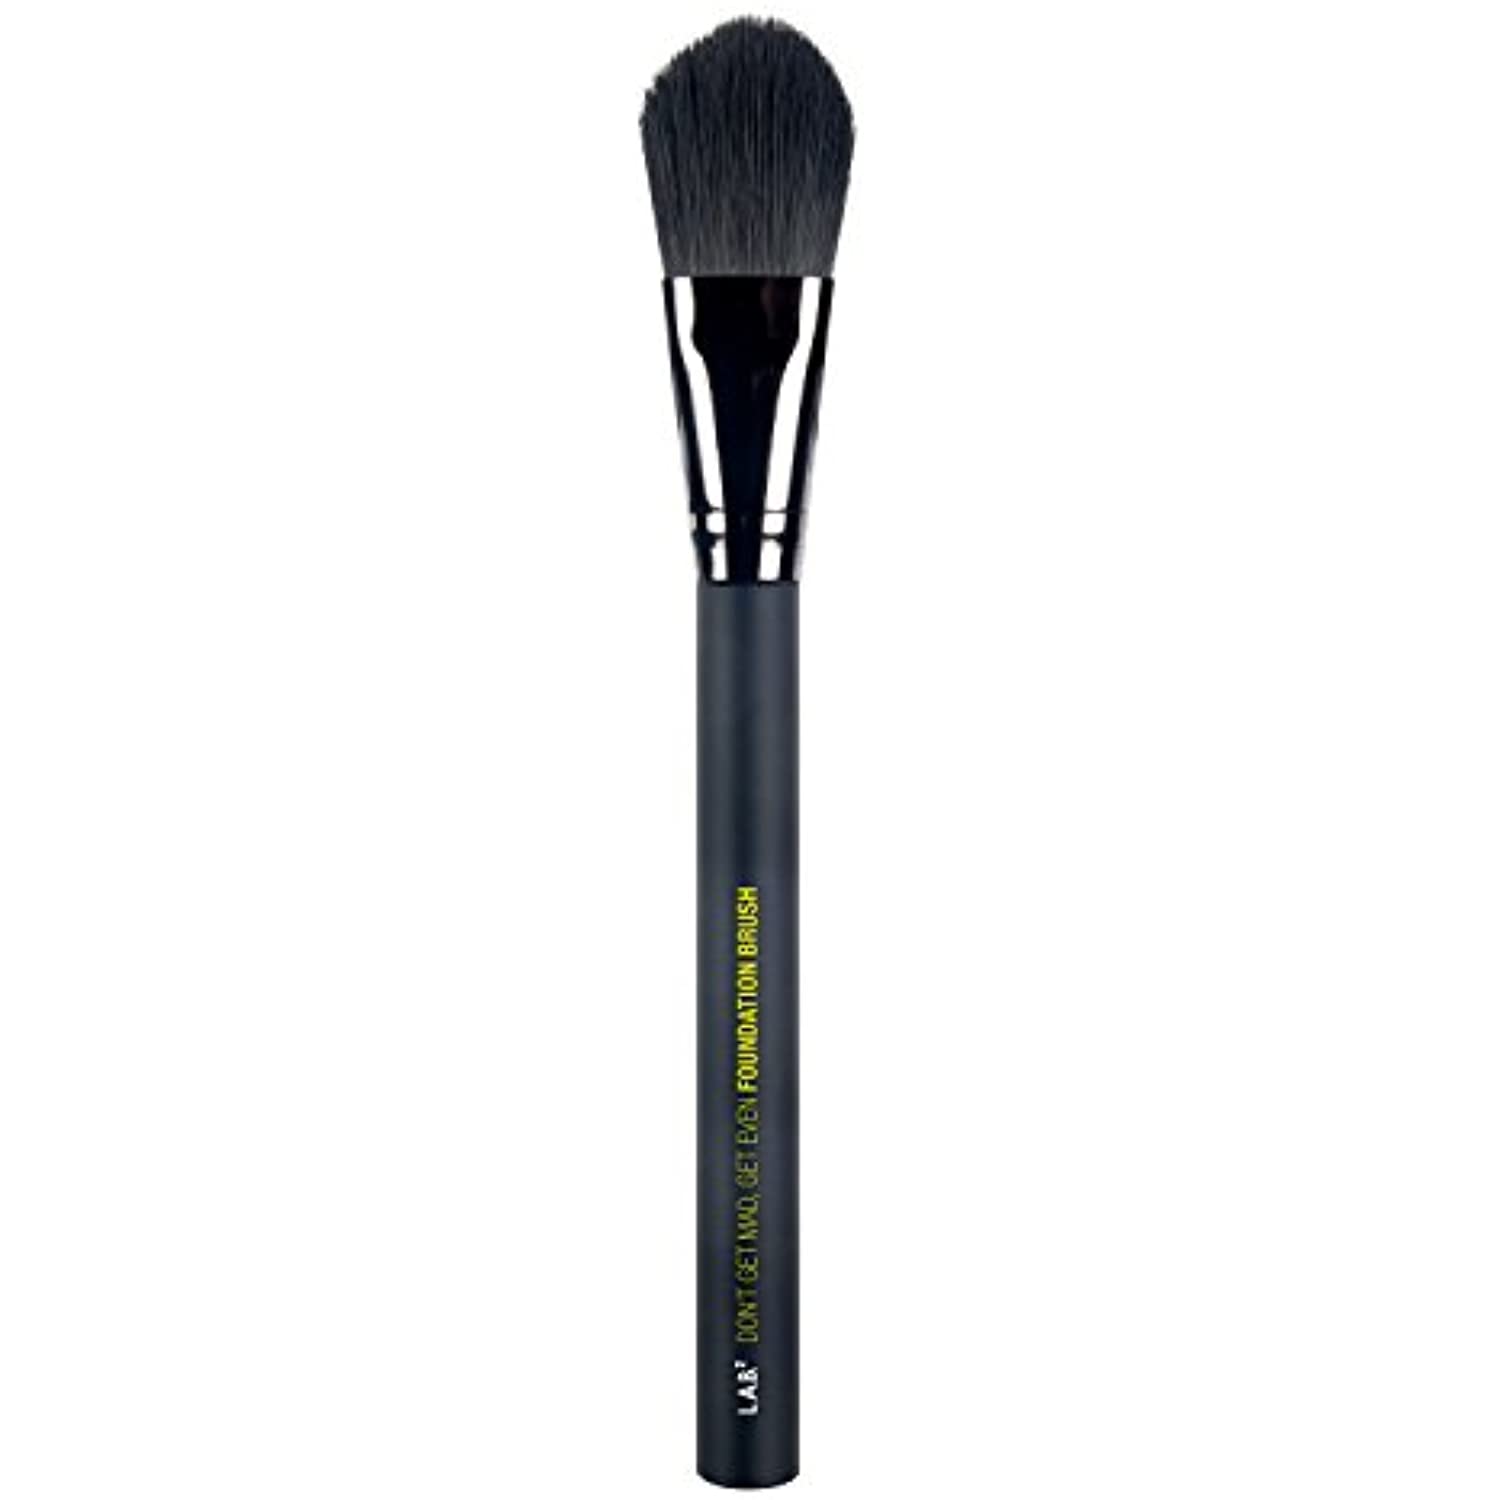 L.A.B.2 Don't Get Mad, Get Even Foundation Brush - image 5 of 5